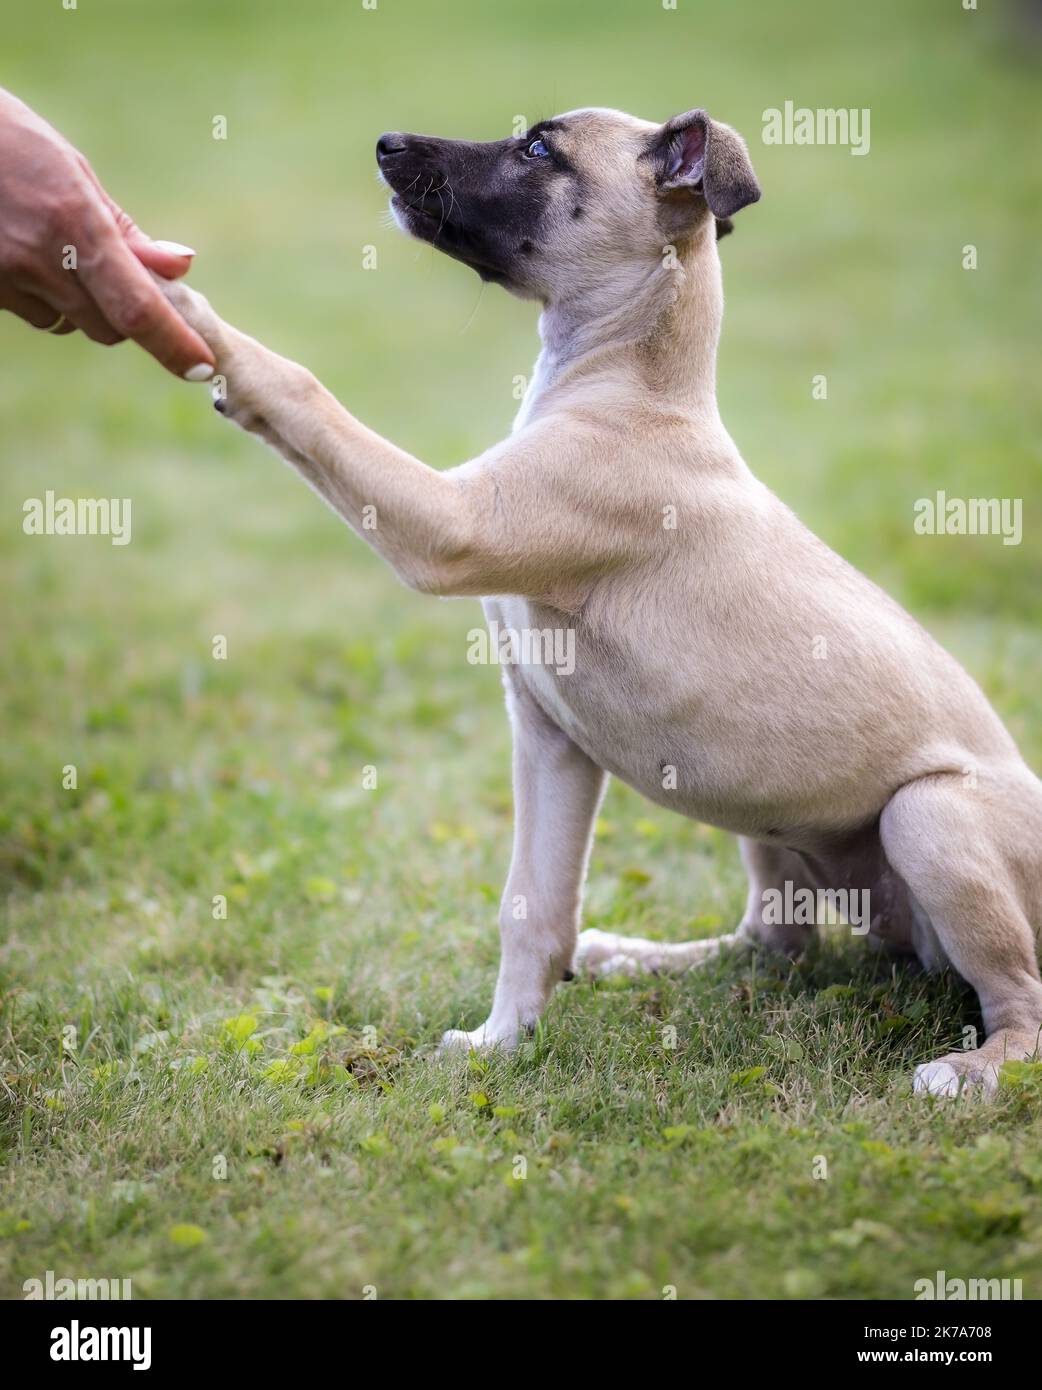 Side Portrait of Whippet Puppy in the Garden. Young Cute English Breed Dog Gives Paw to Human Hand Outside. Stock Photo